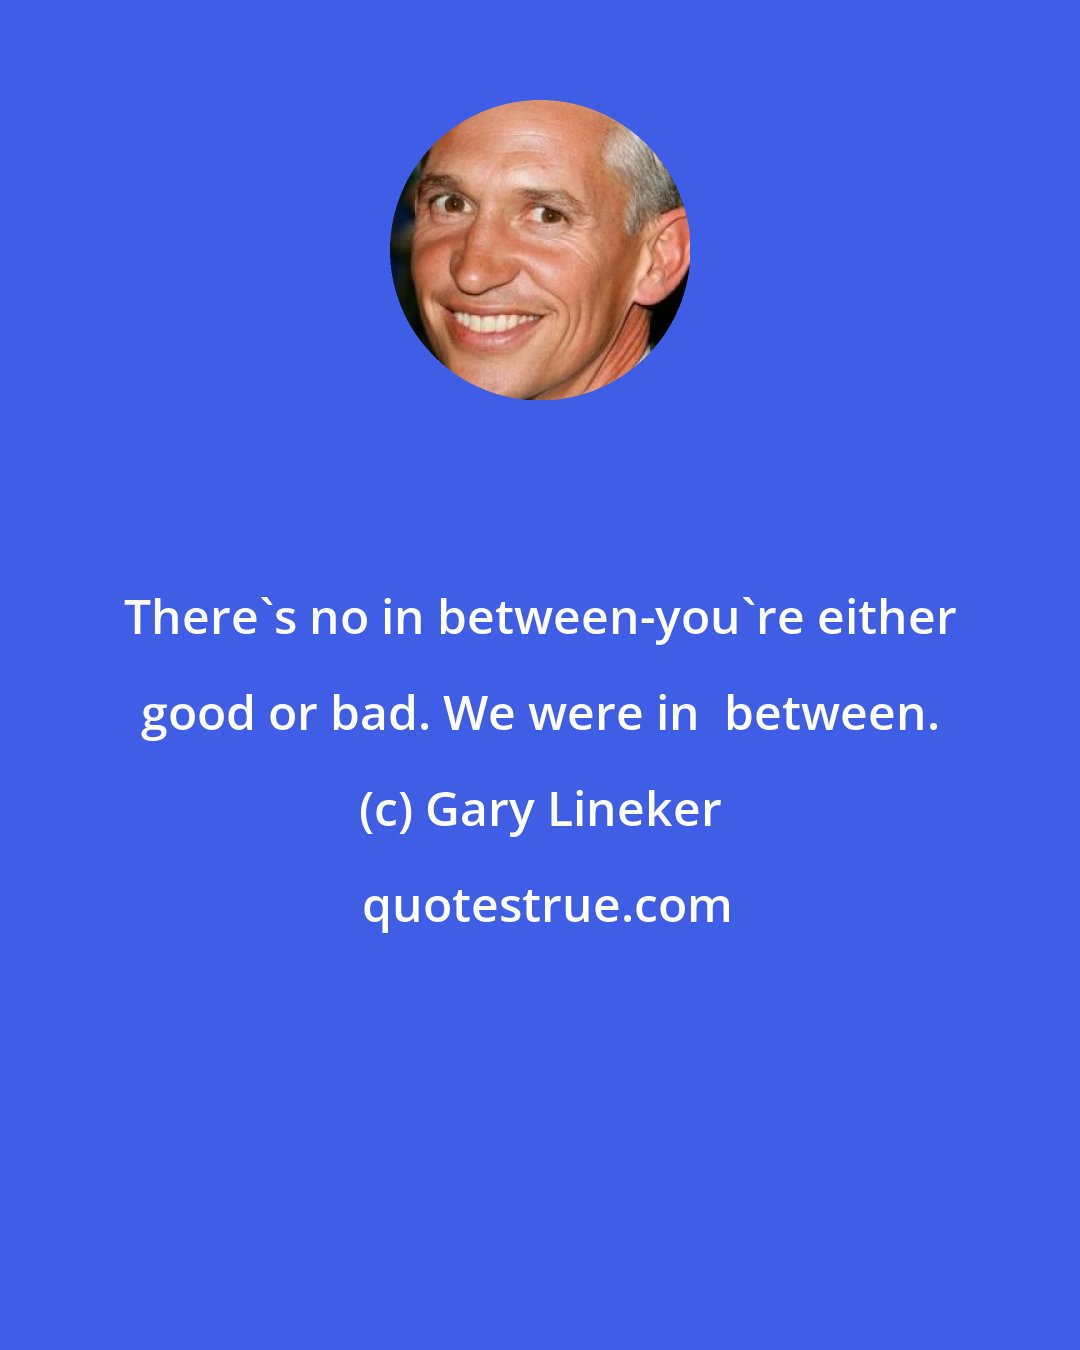 Gary Lineker: There's no in between-you're either good or bad. We were in  between.